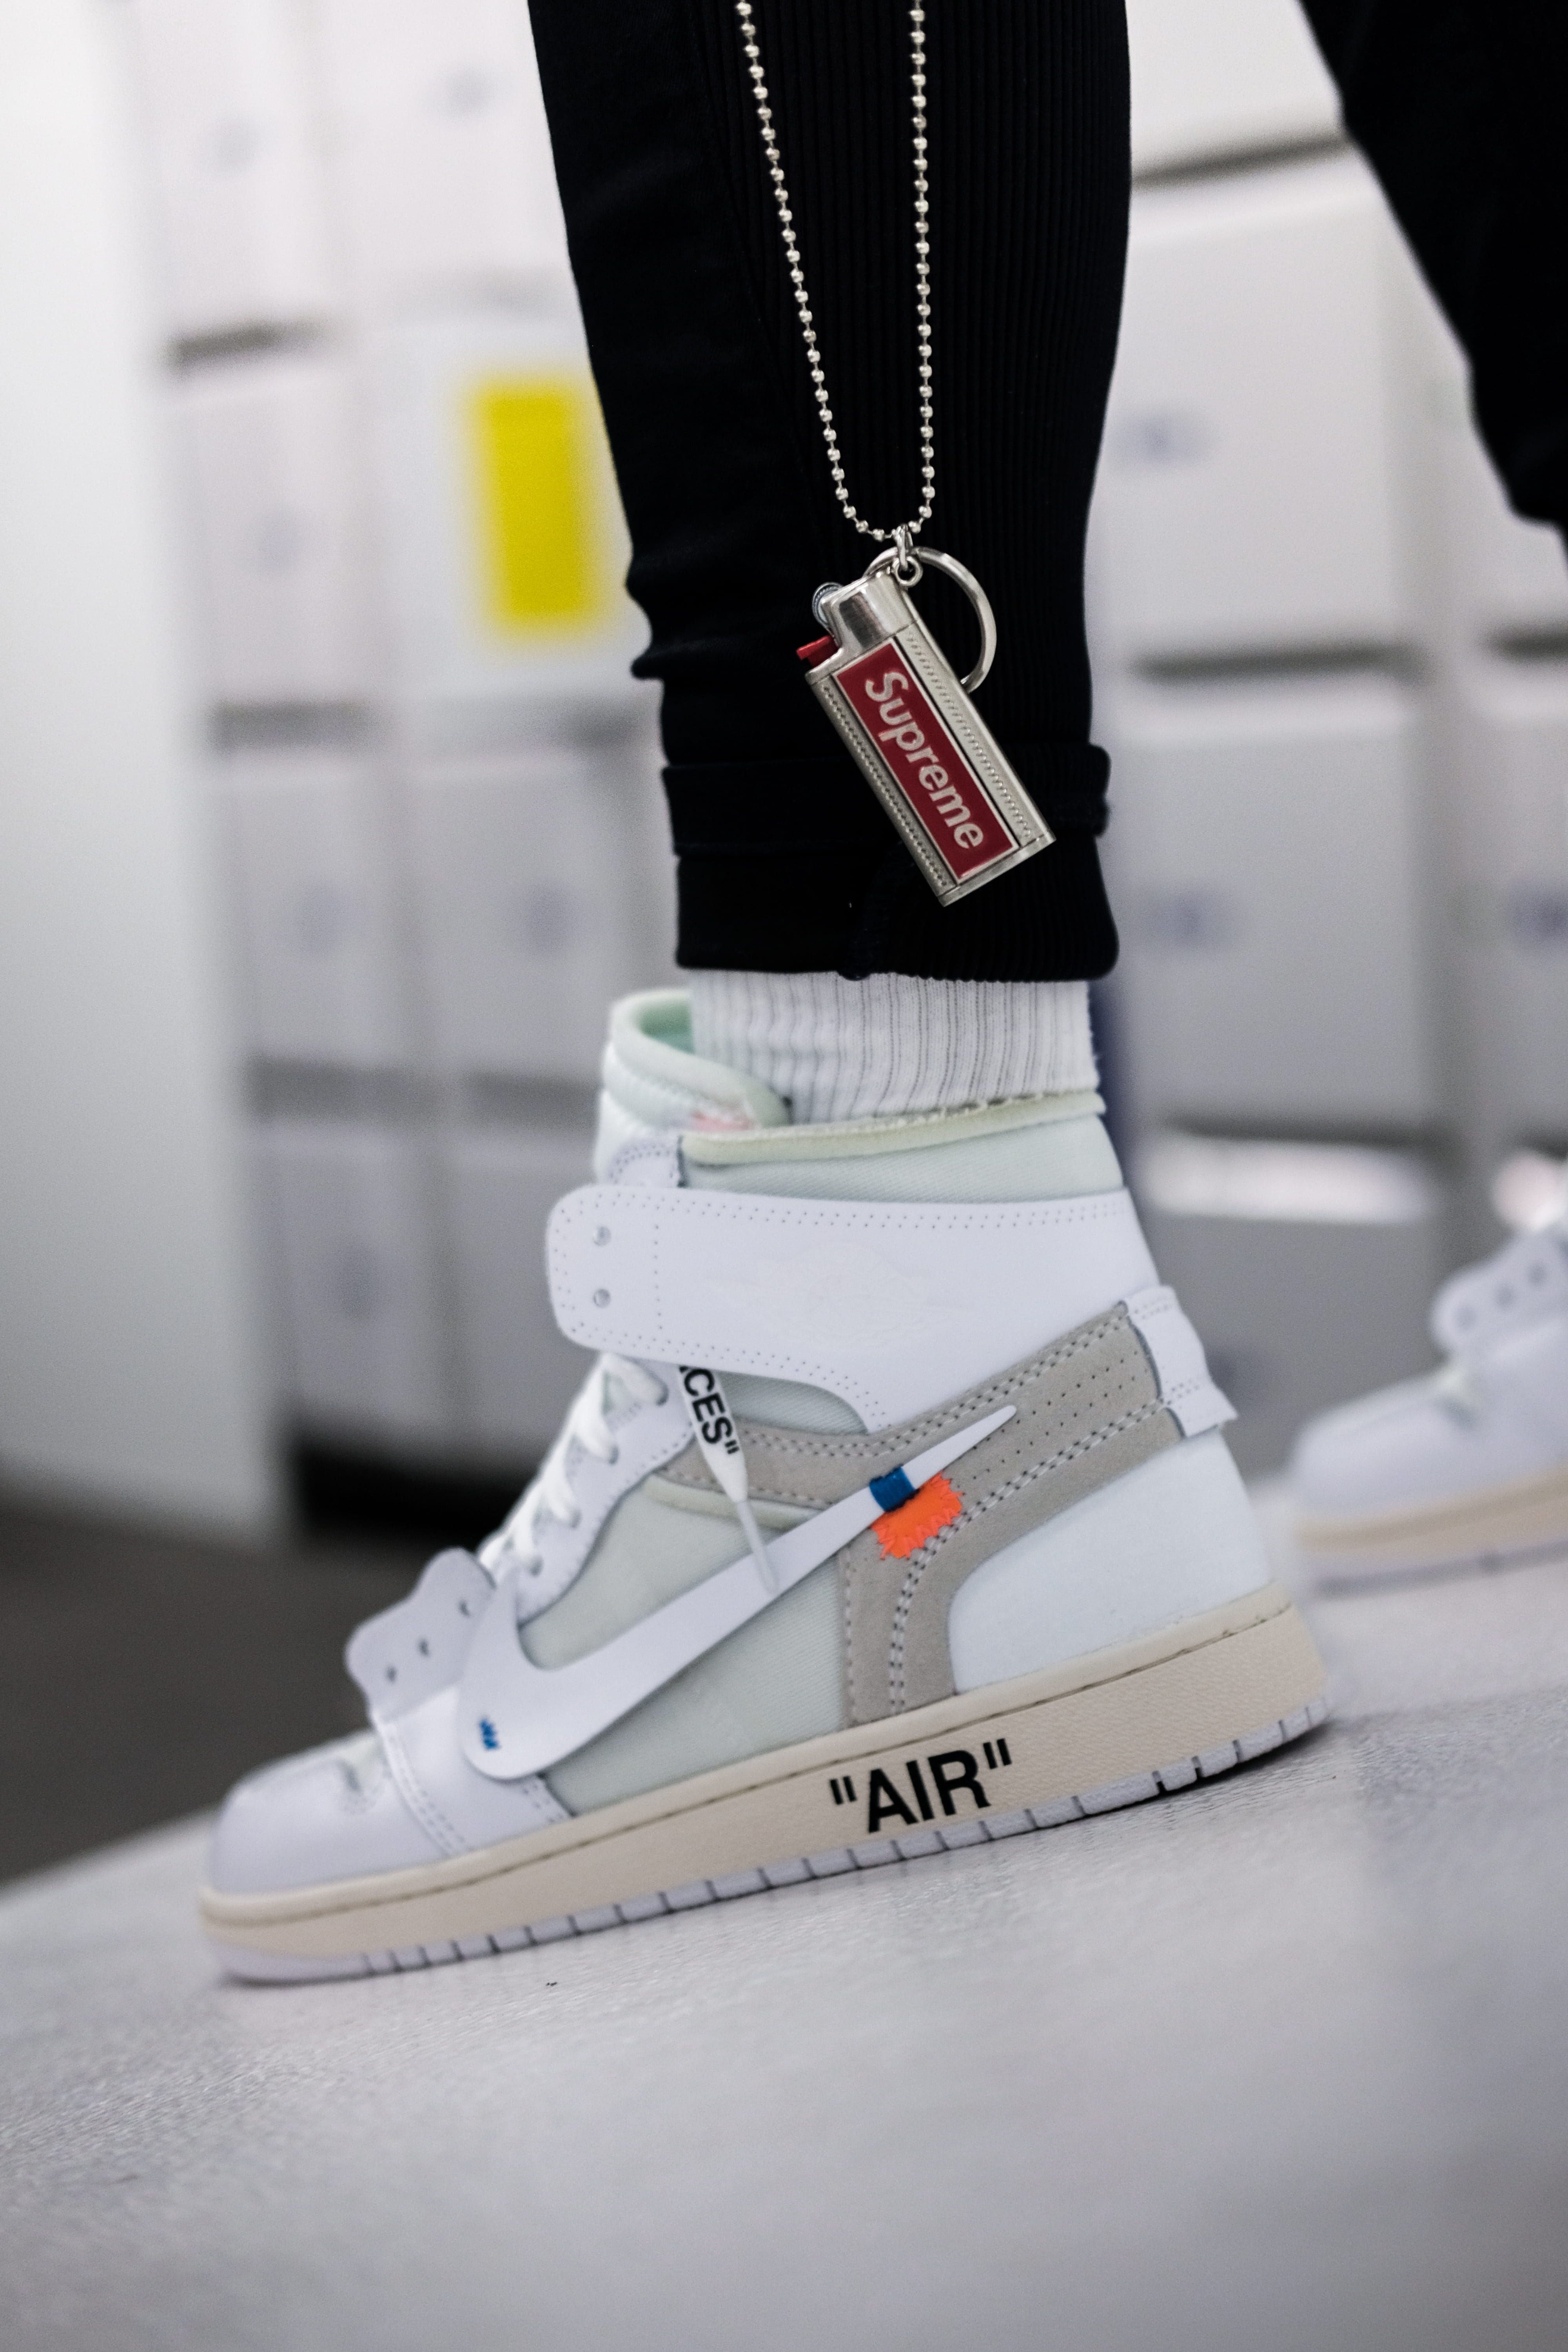 Wallpaper Person Wearing Nike X Off White Shoe, Clothing, Apparel, Footwear. Off White Shoes, Hype Shoes, White Shoes